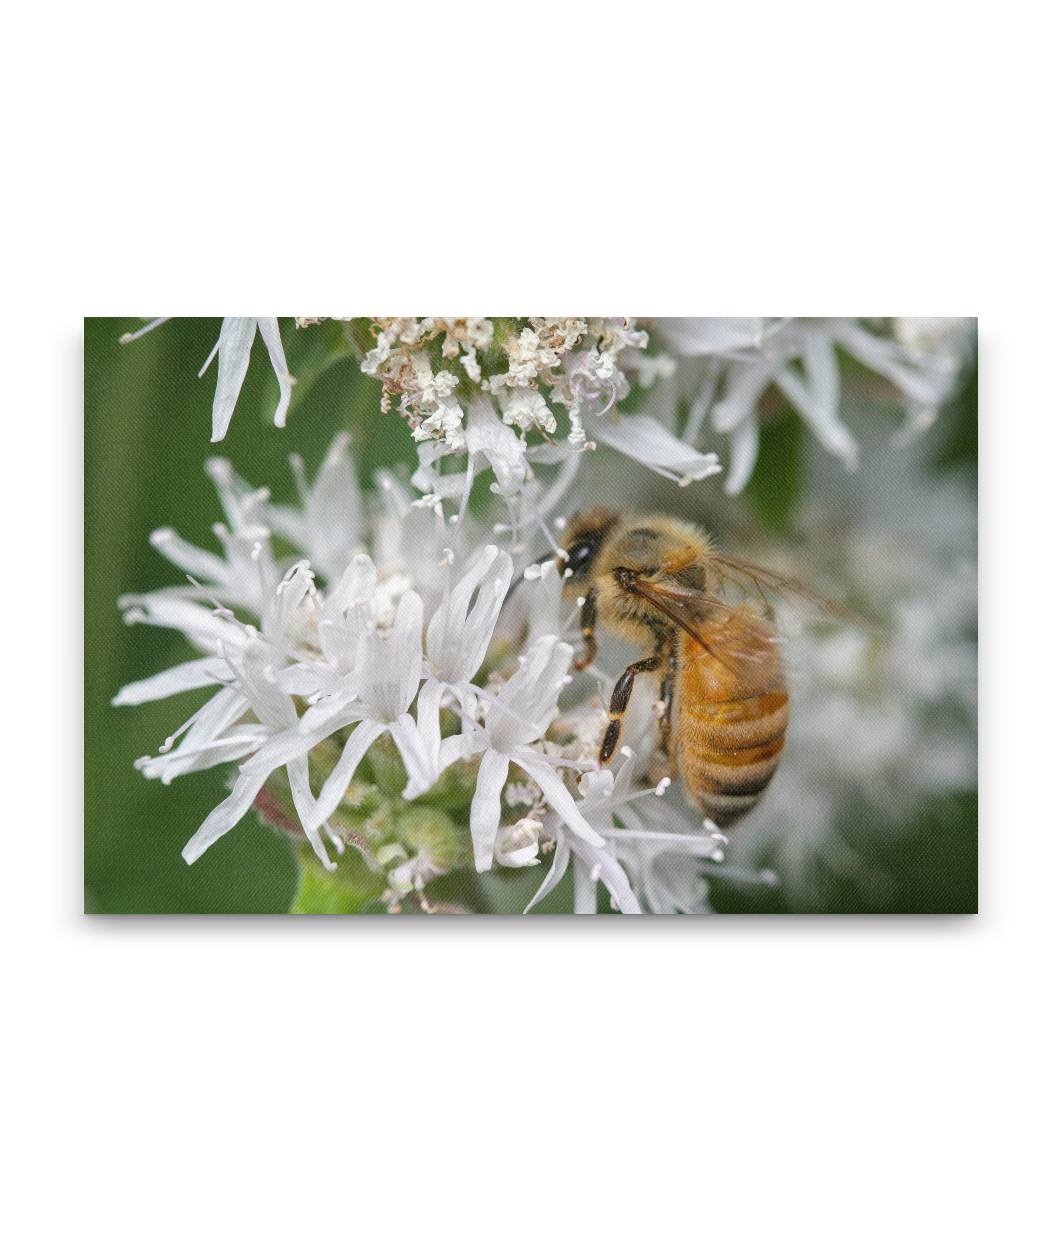 Honey Bee and Mountain Coyote Mint, Lassen Volcanic National Park, California